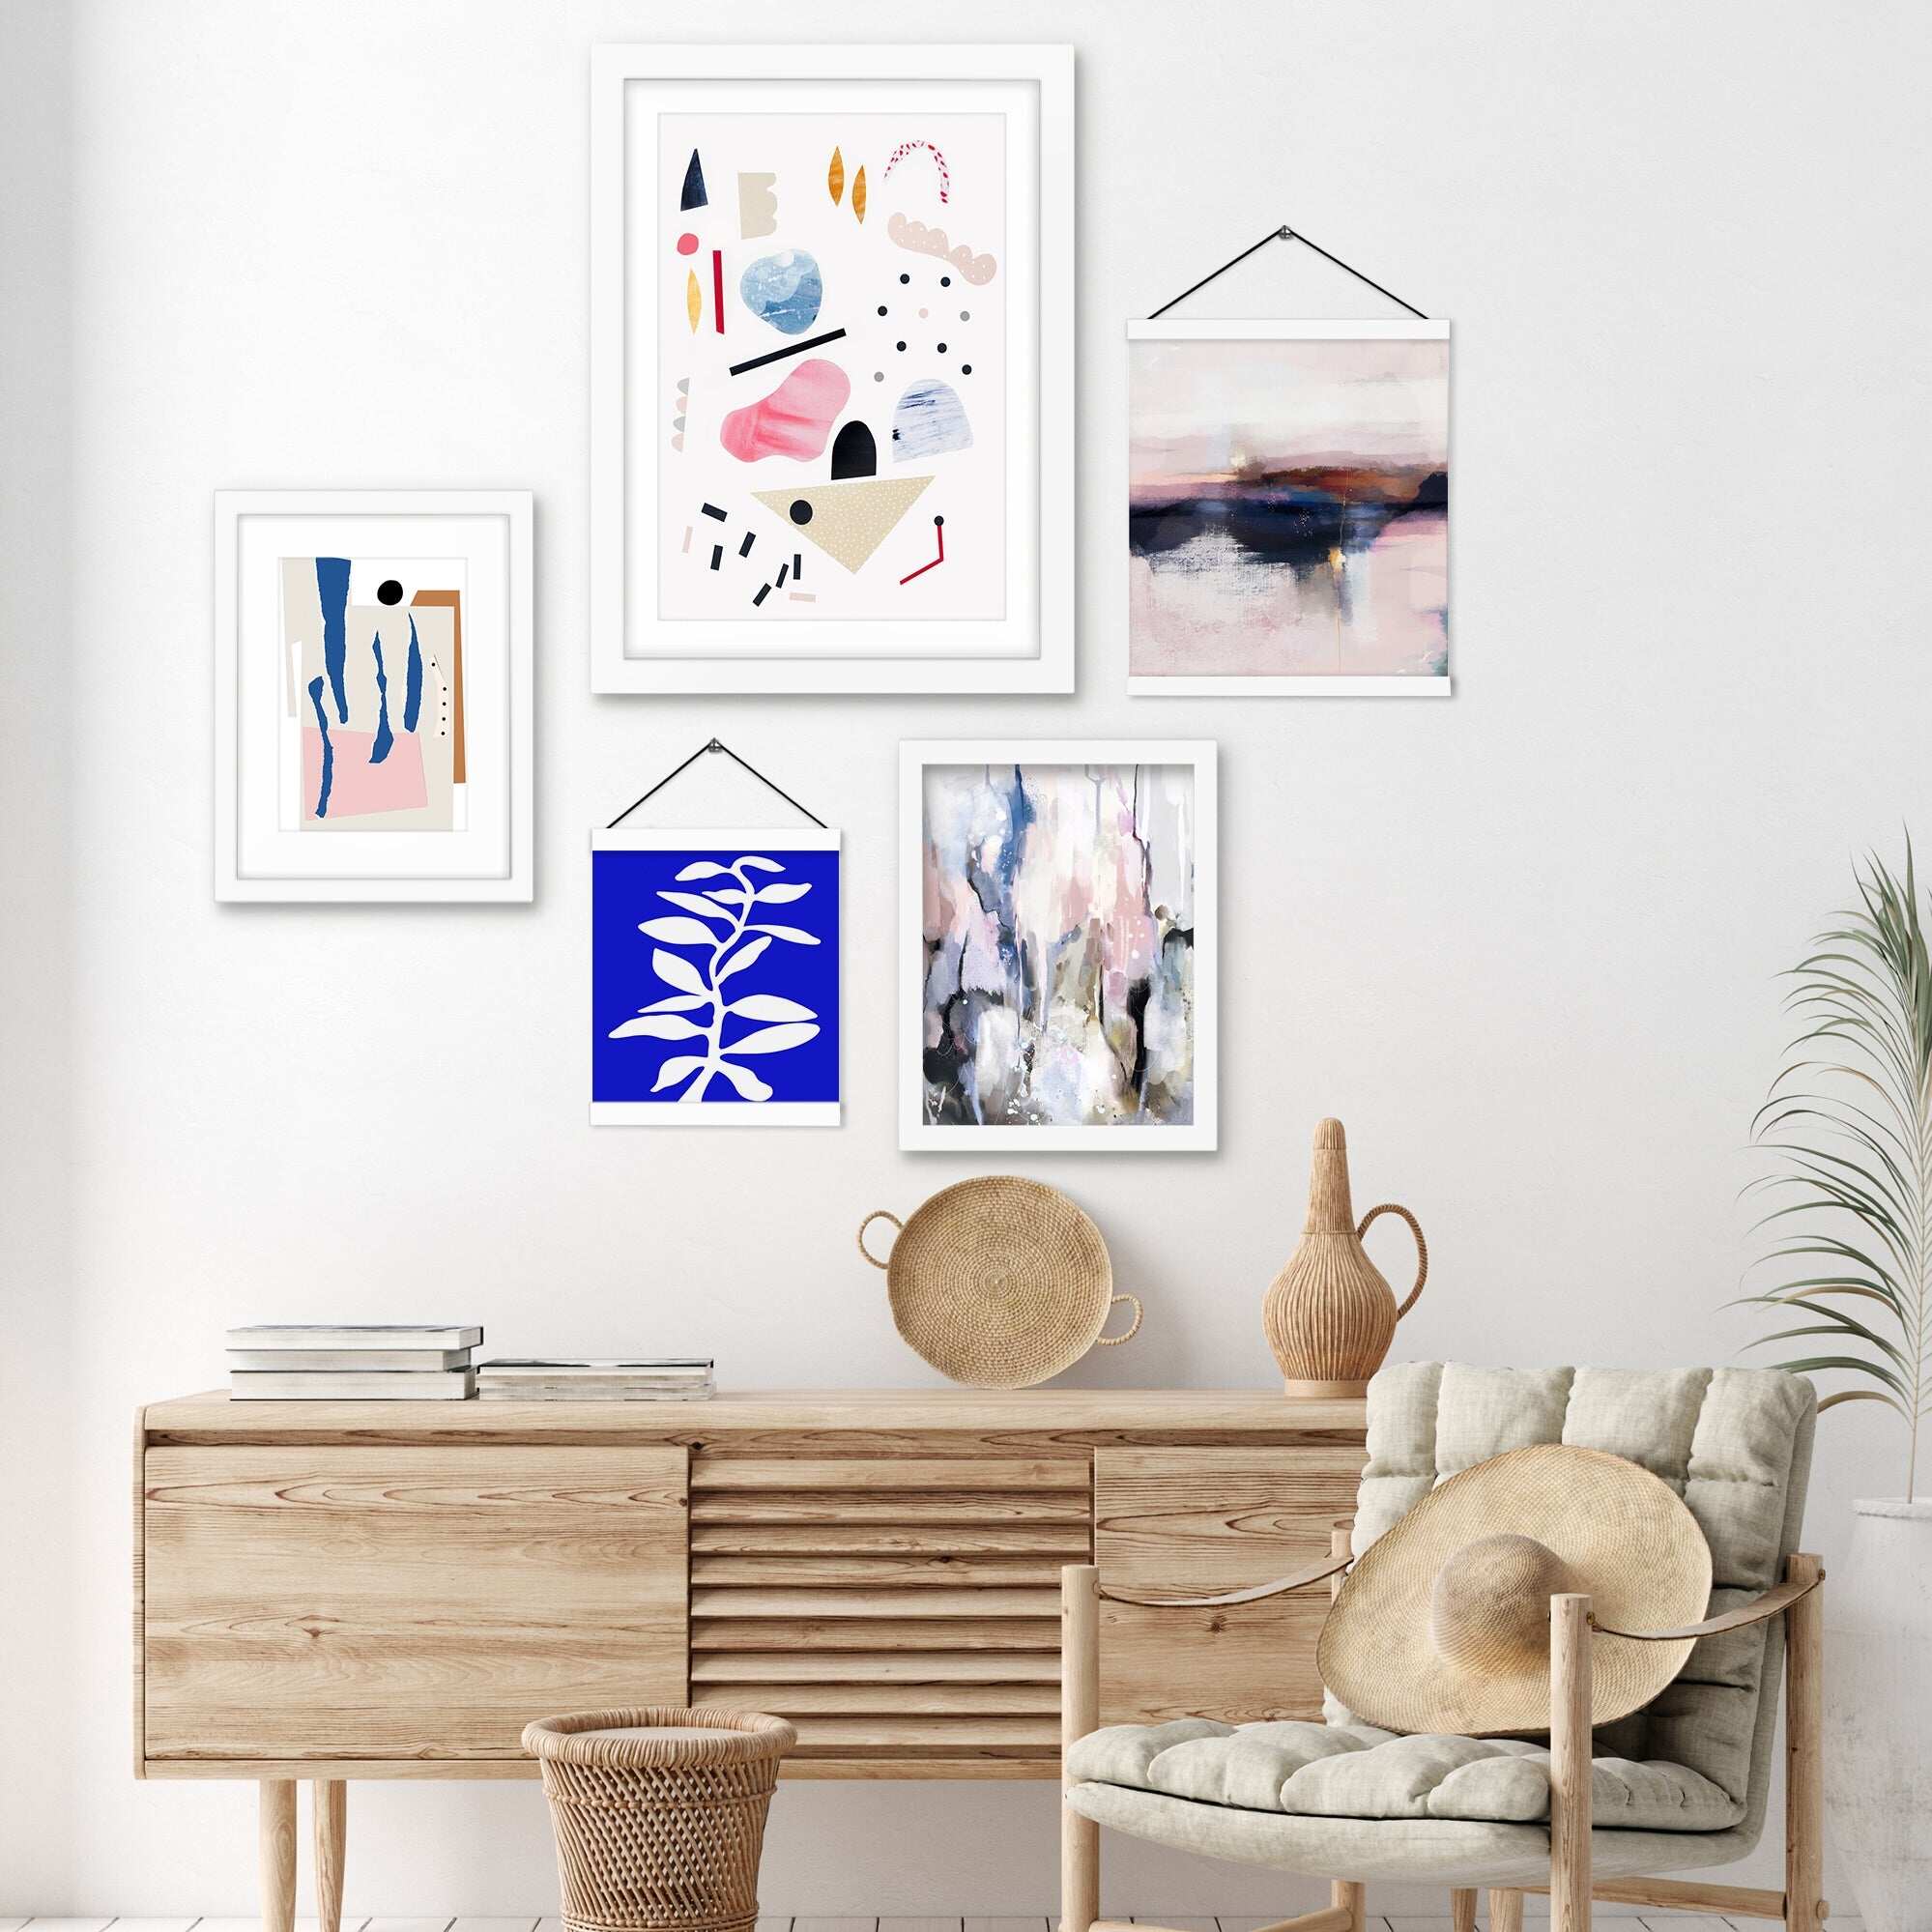 5 Piece Framed Multimedia Gallery Wall Art Set Blue and Pink Matisse Abstract Shapes